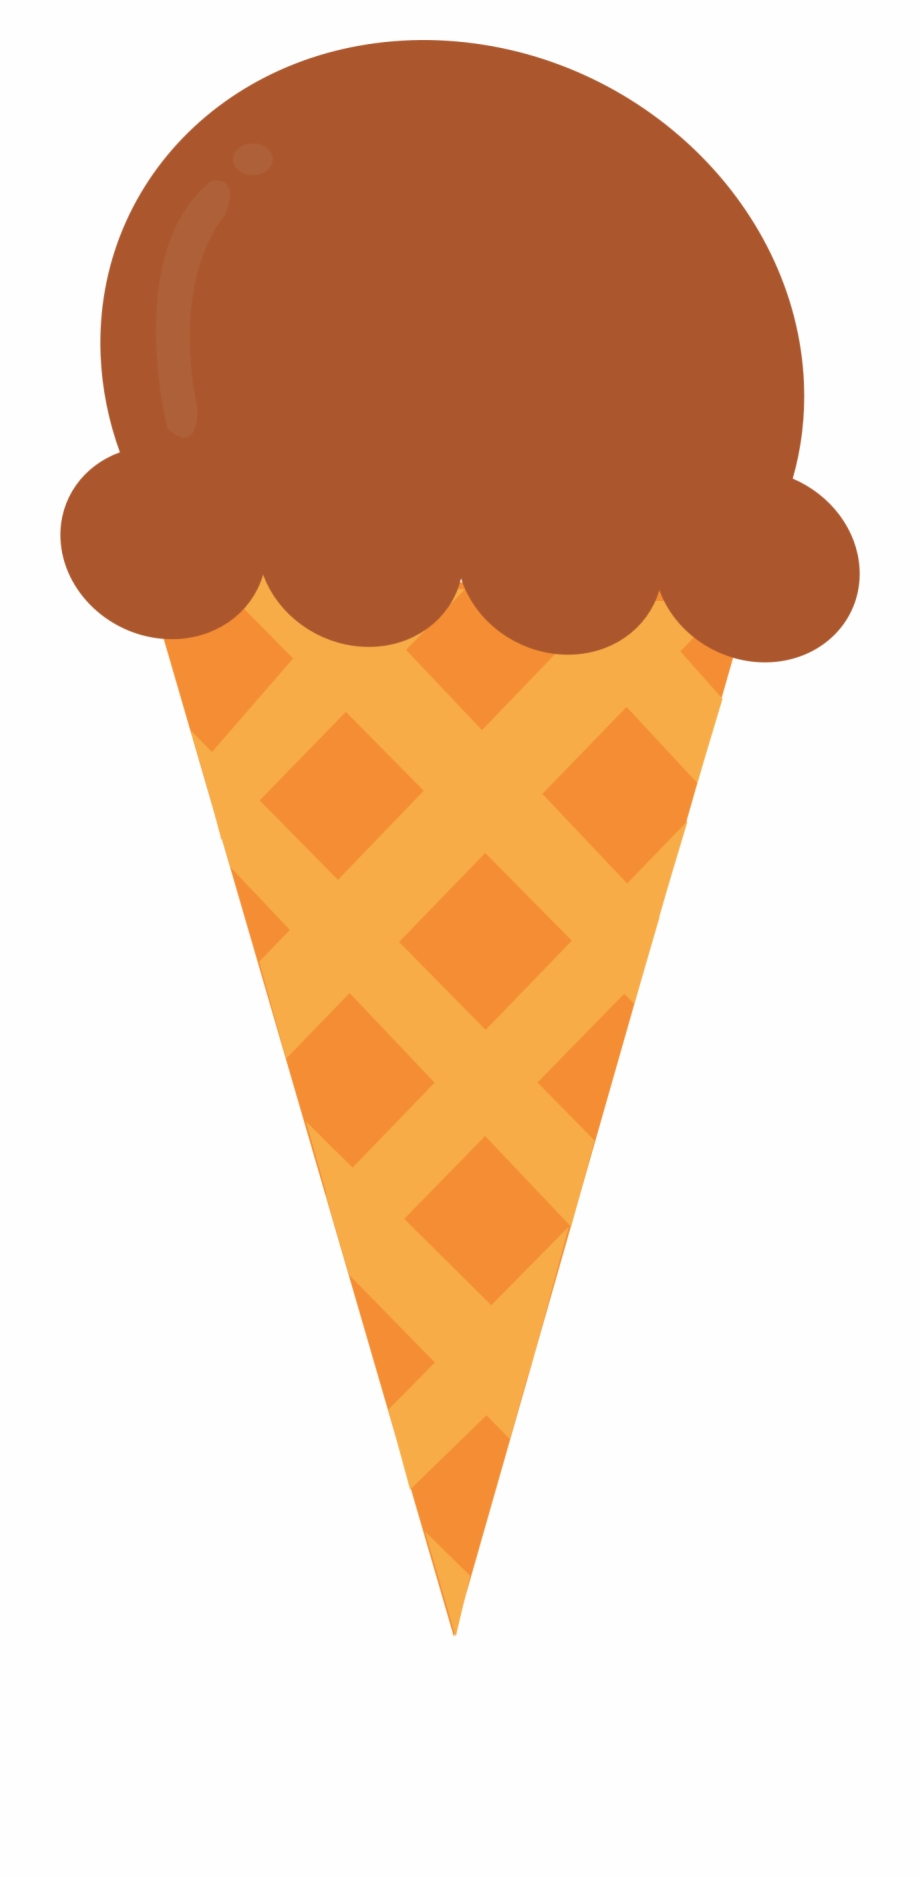 download high quality ice cream cone clip art transparent png images